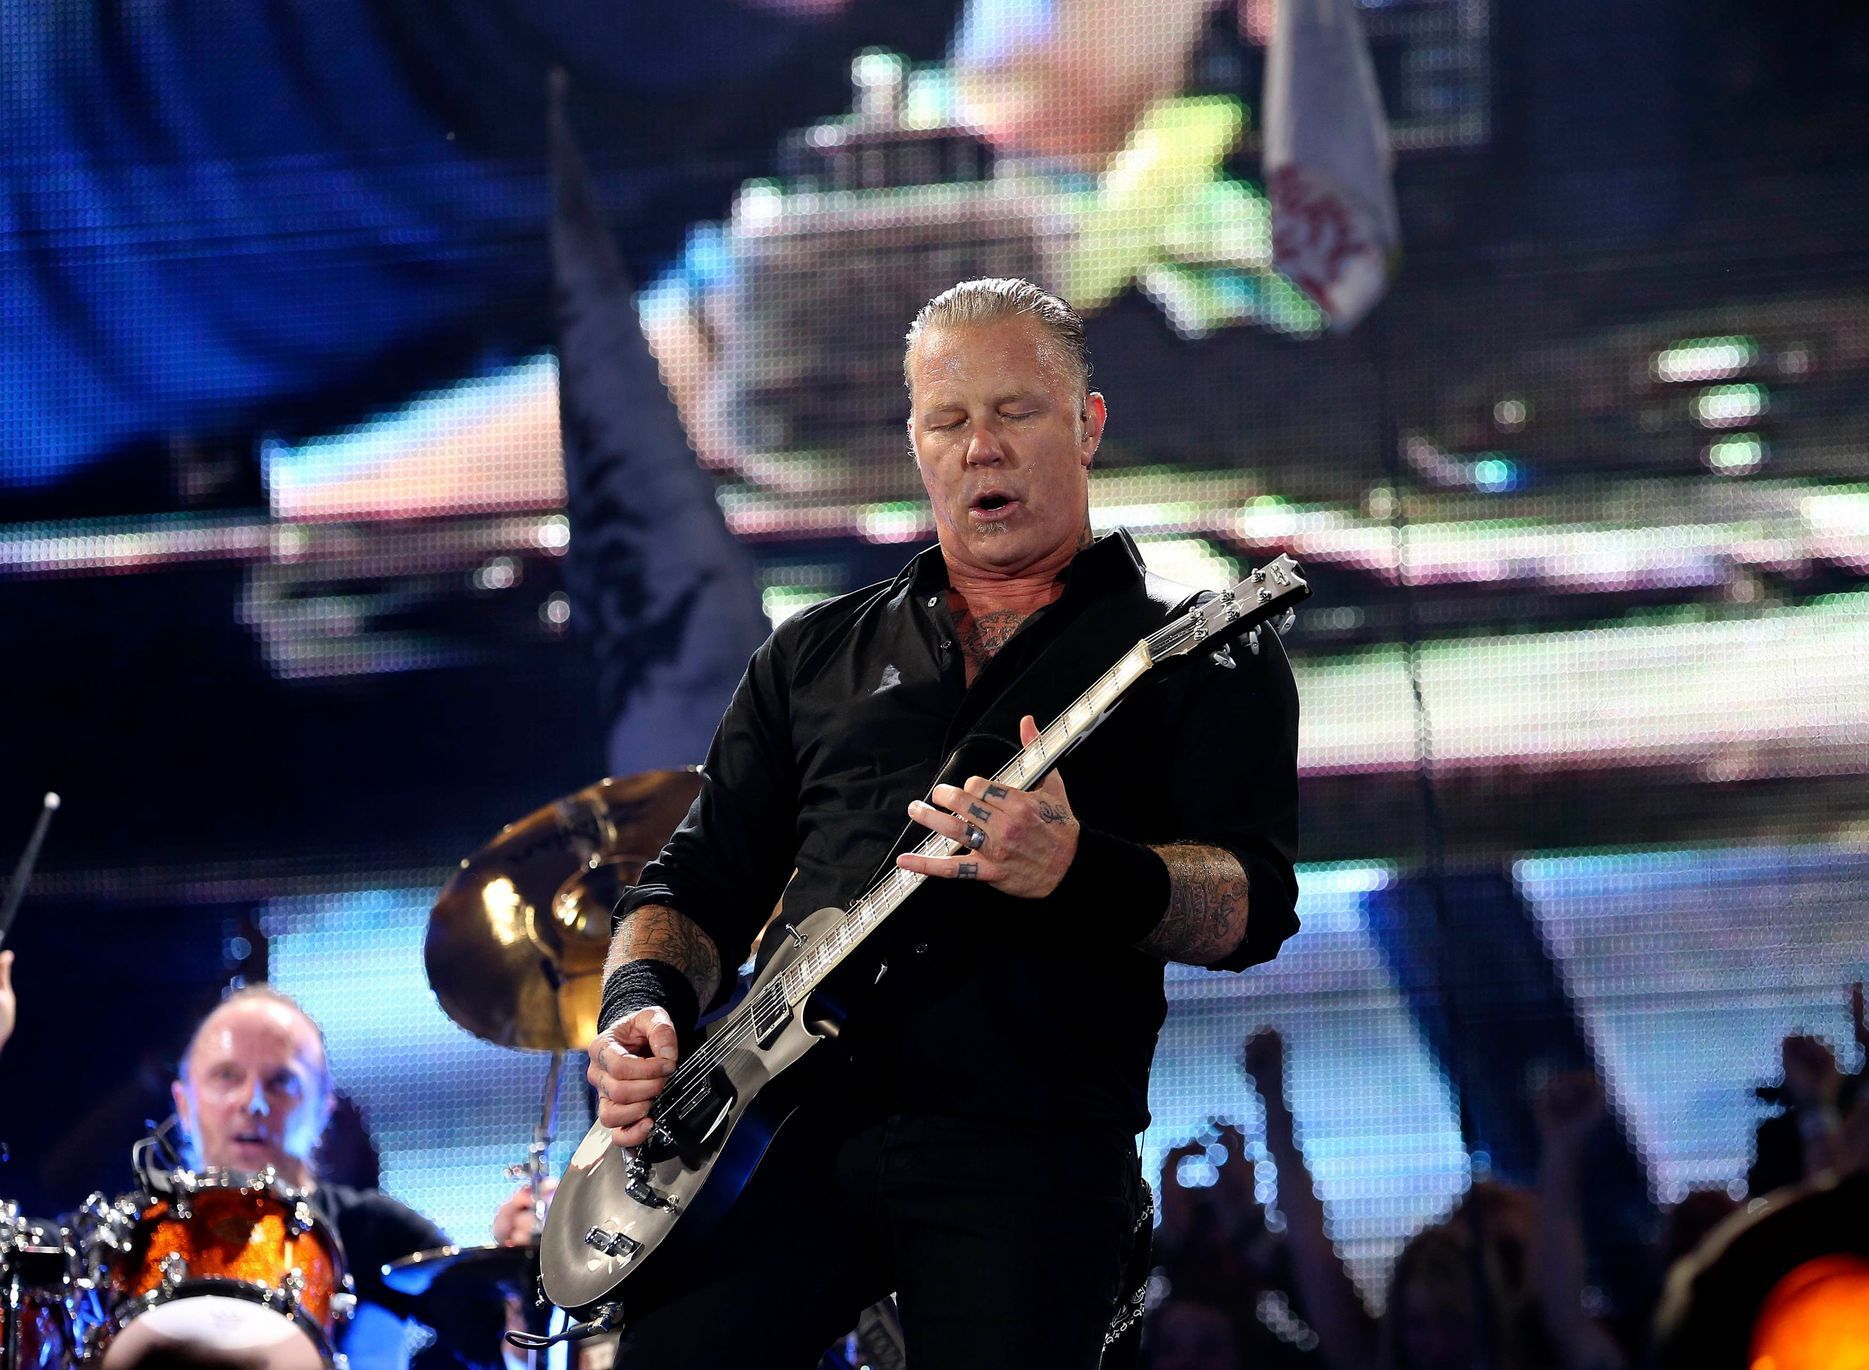 Hetfield of Metallica performs on the Pyramid Stage at Worthy Farm in Somerset, during the Glastonbury Festival